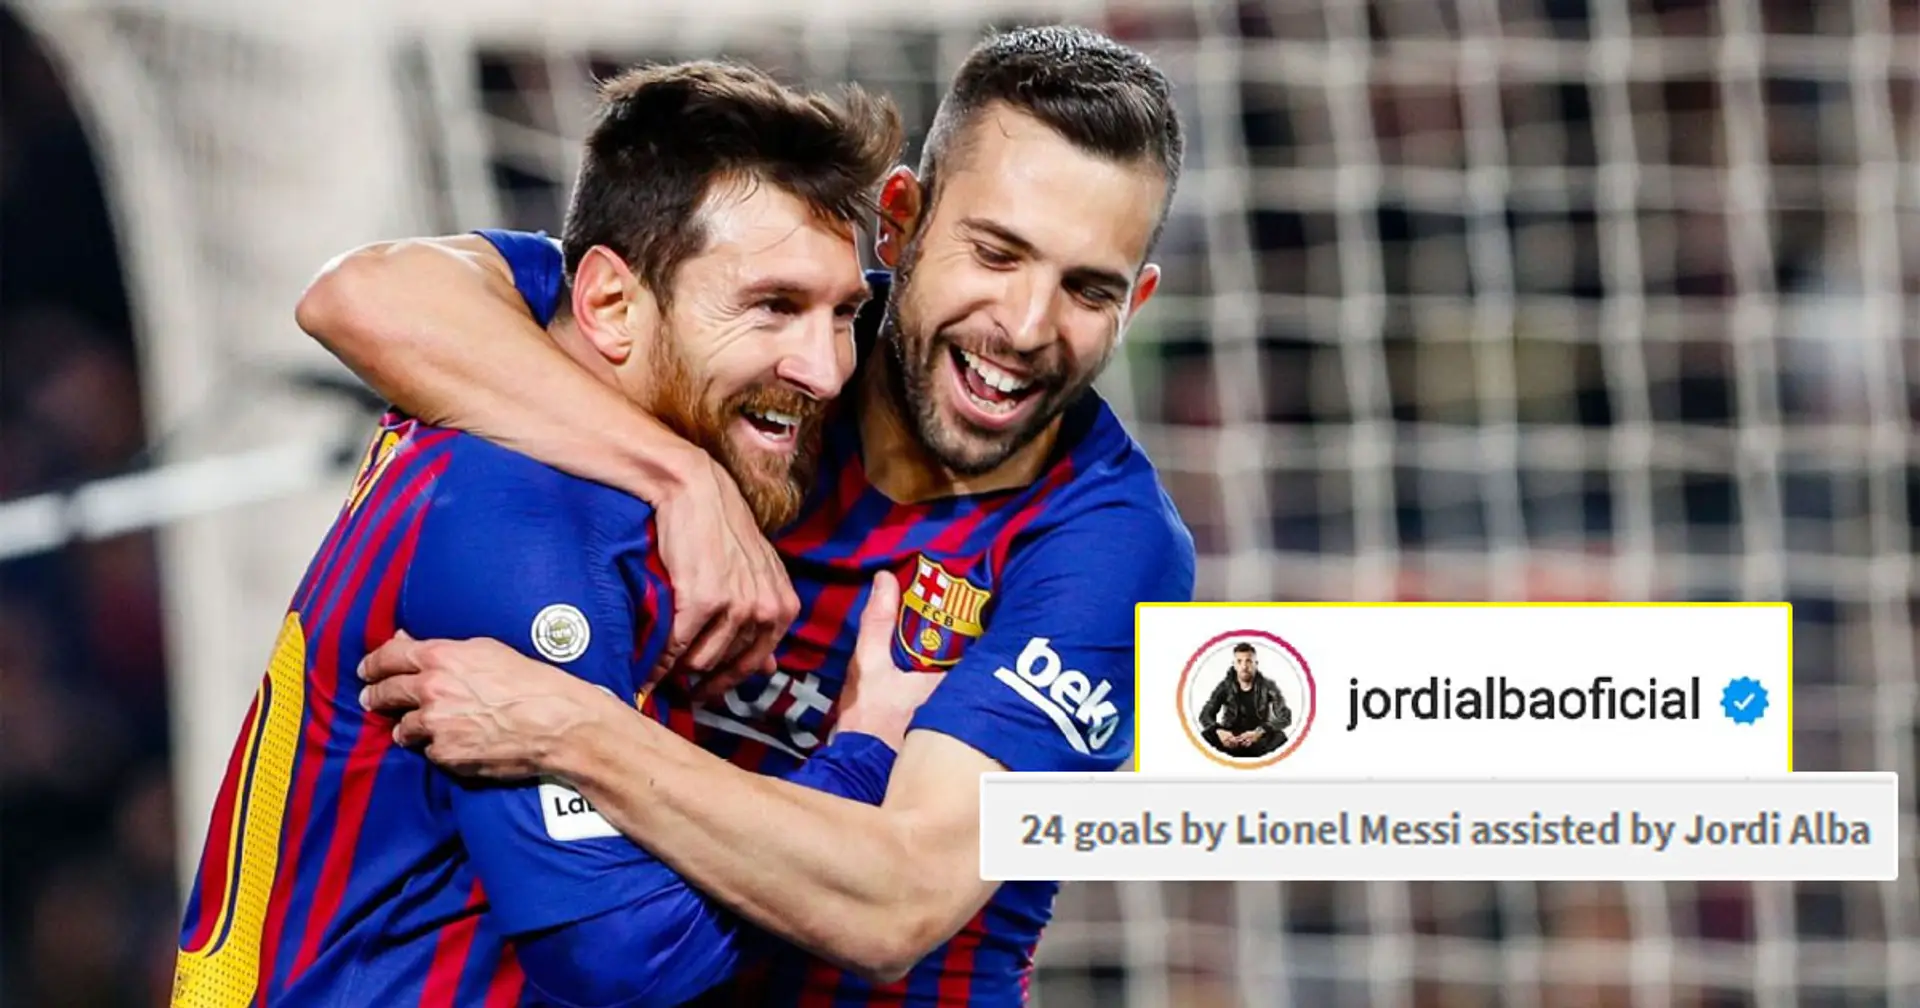 Jordi Alba mentions famous 'back passes' as he pens farewell letter to Messi